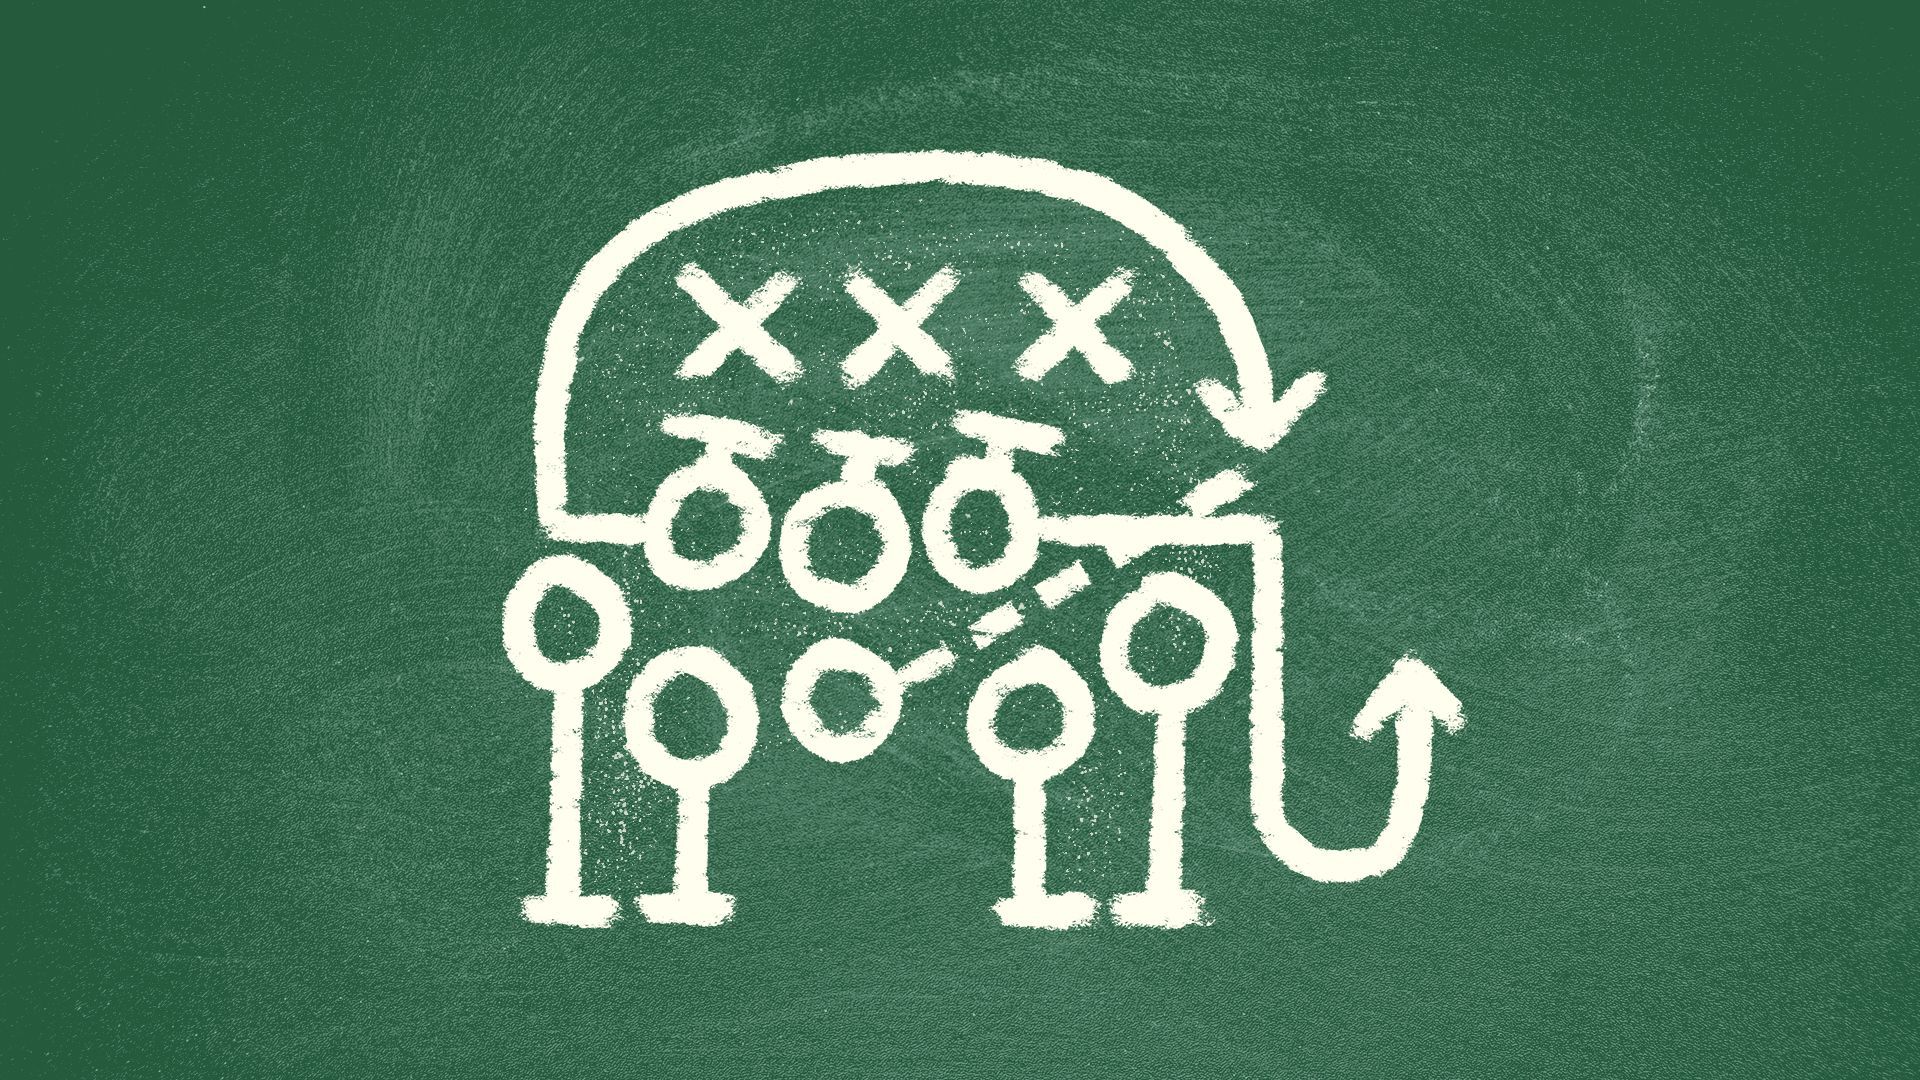 Illustration of the Republican elephant logo made out of football play diagram elements.